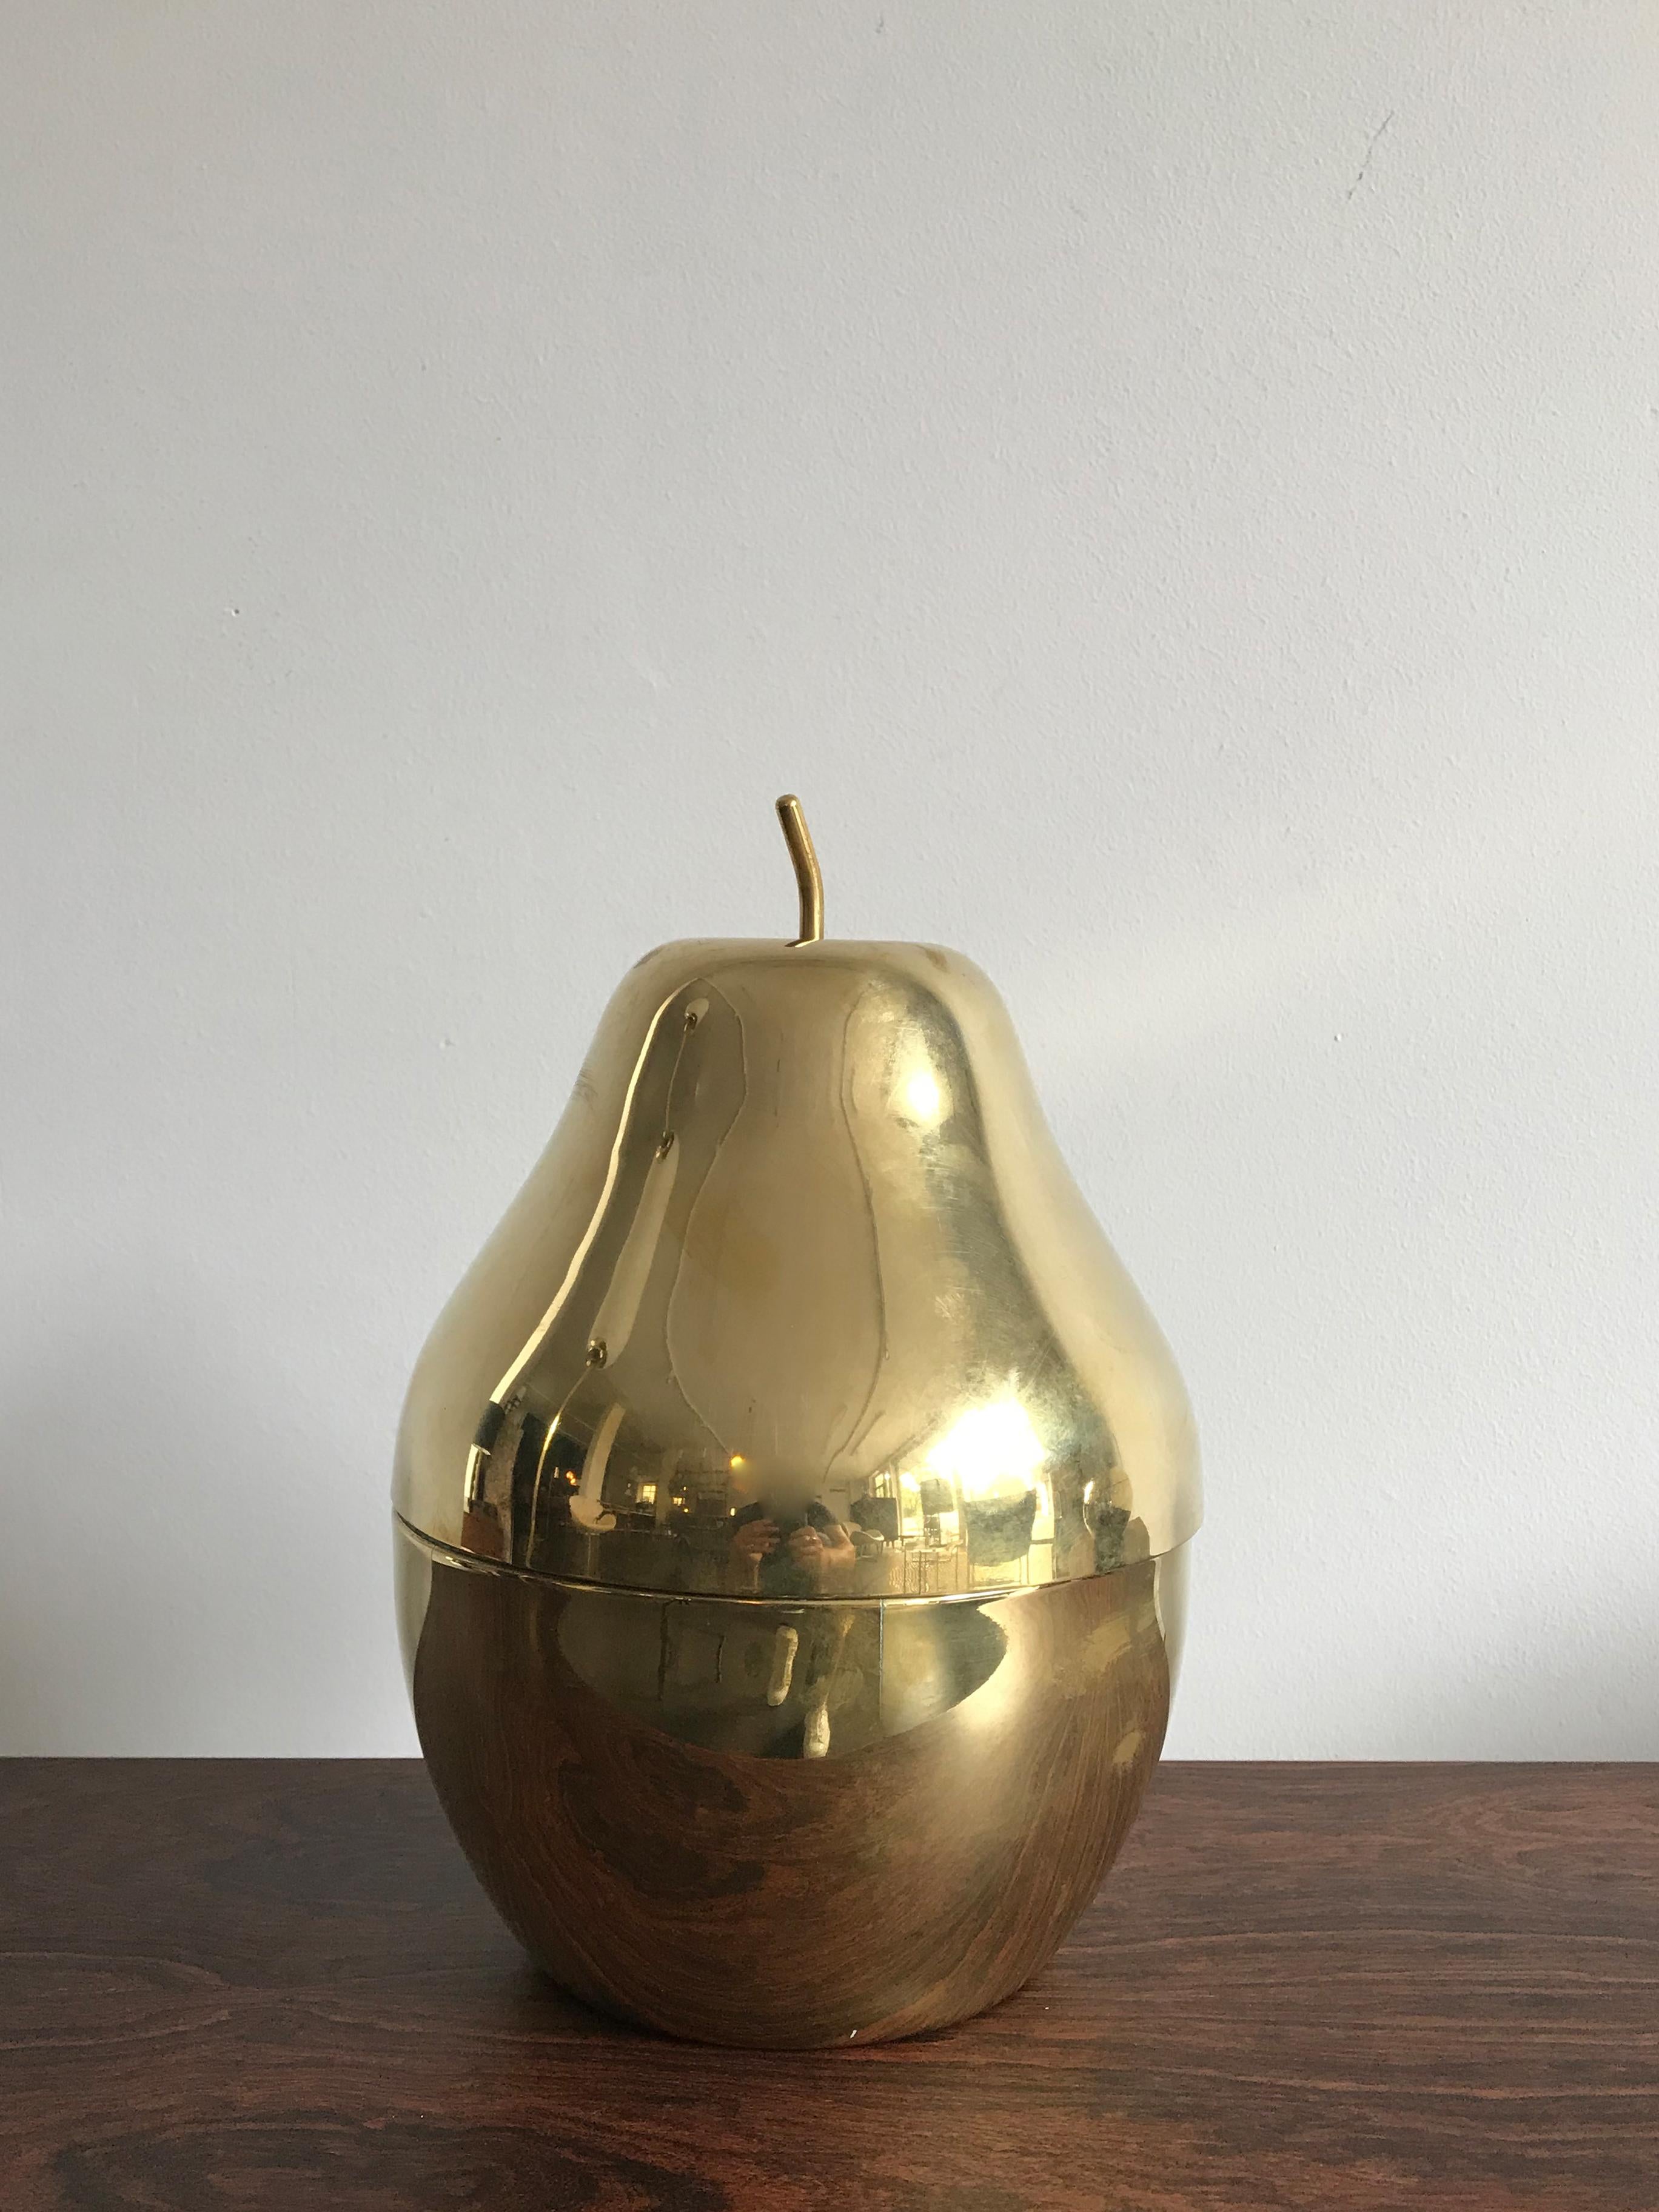 Pear or apple shaped Italian brass containers or boxes ... cookie holders, sweet holders, candy boxes etc ... 1970s.
Size:
Pear: height 27 cm - diameter 20 cm
Apple: height 21 cm - diameter 20 cm.

Please note that the items are original of the